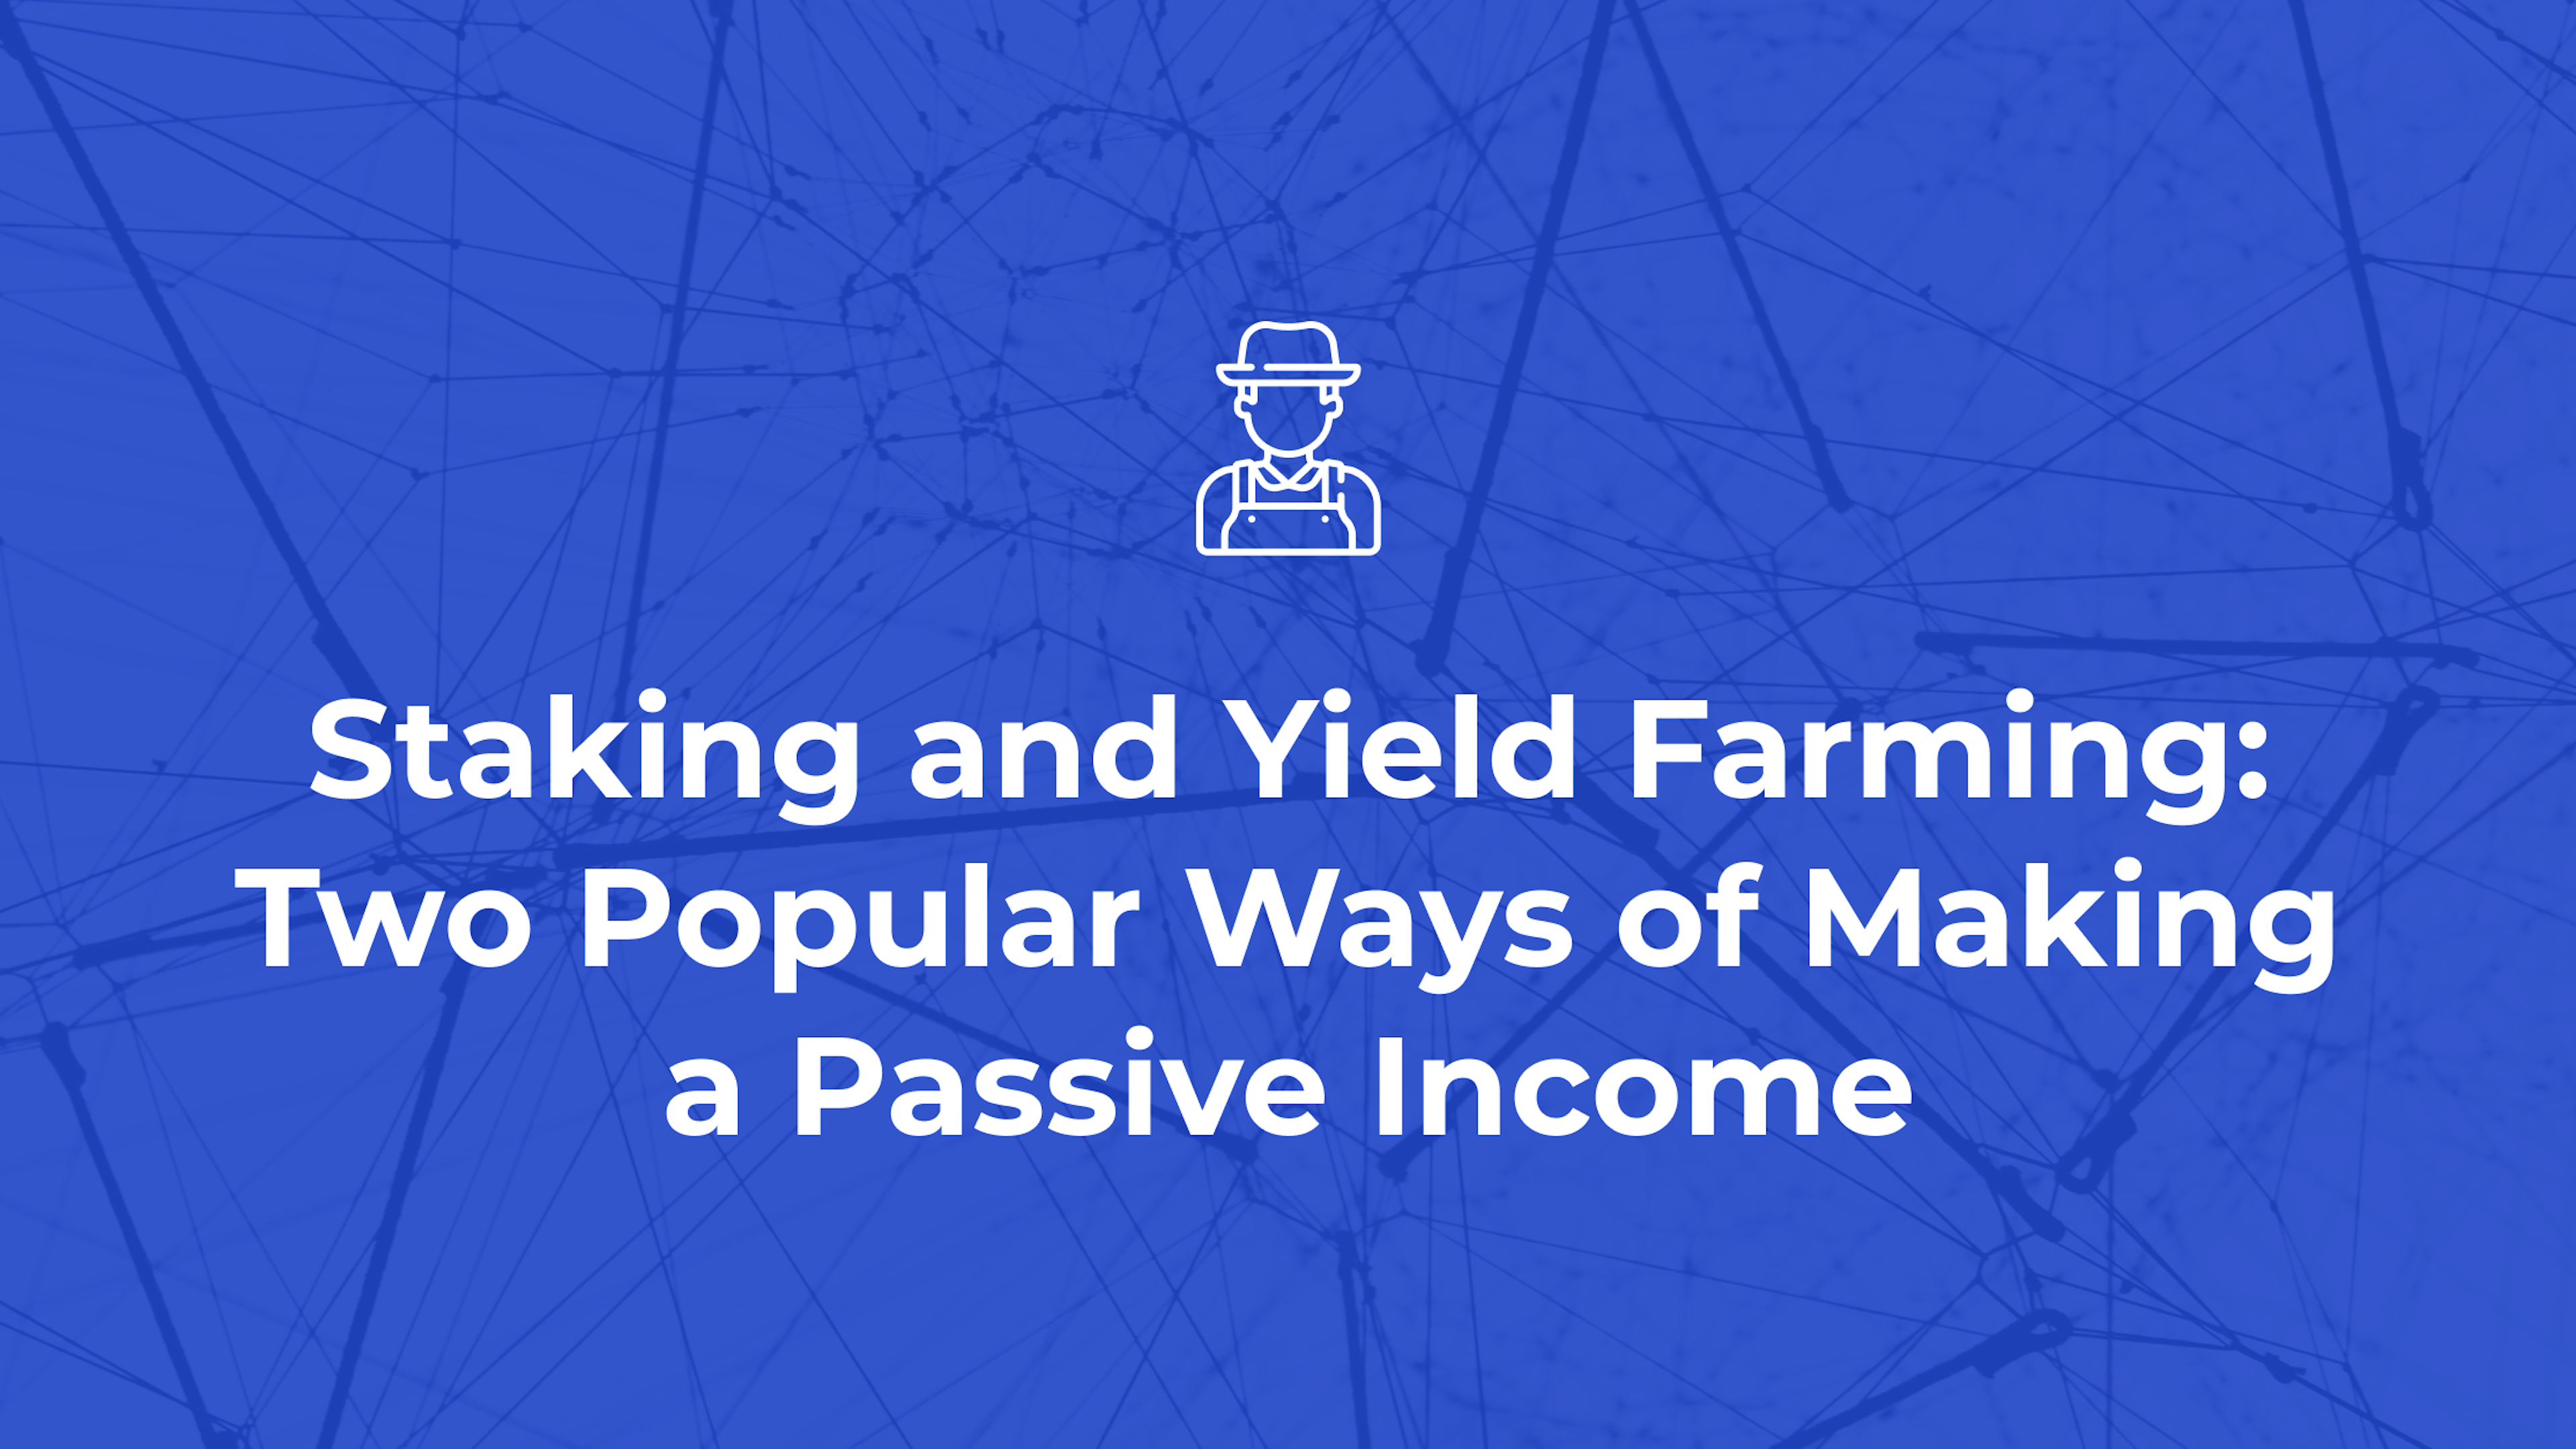 Staking and Yield Farming: Two Popular Ways of Making a Passive Income